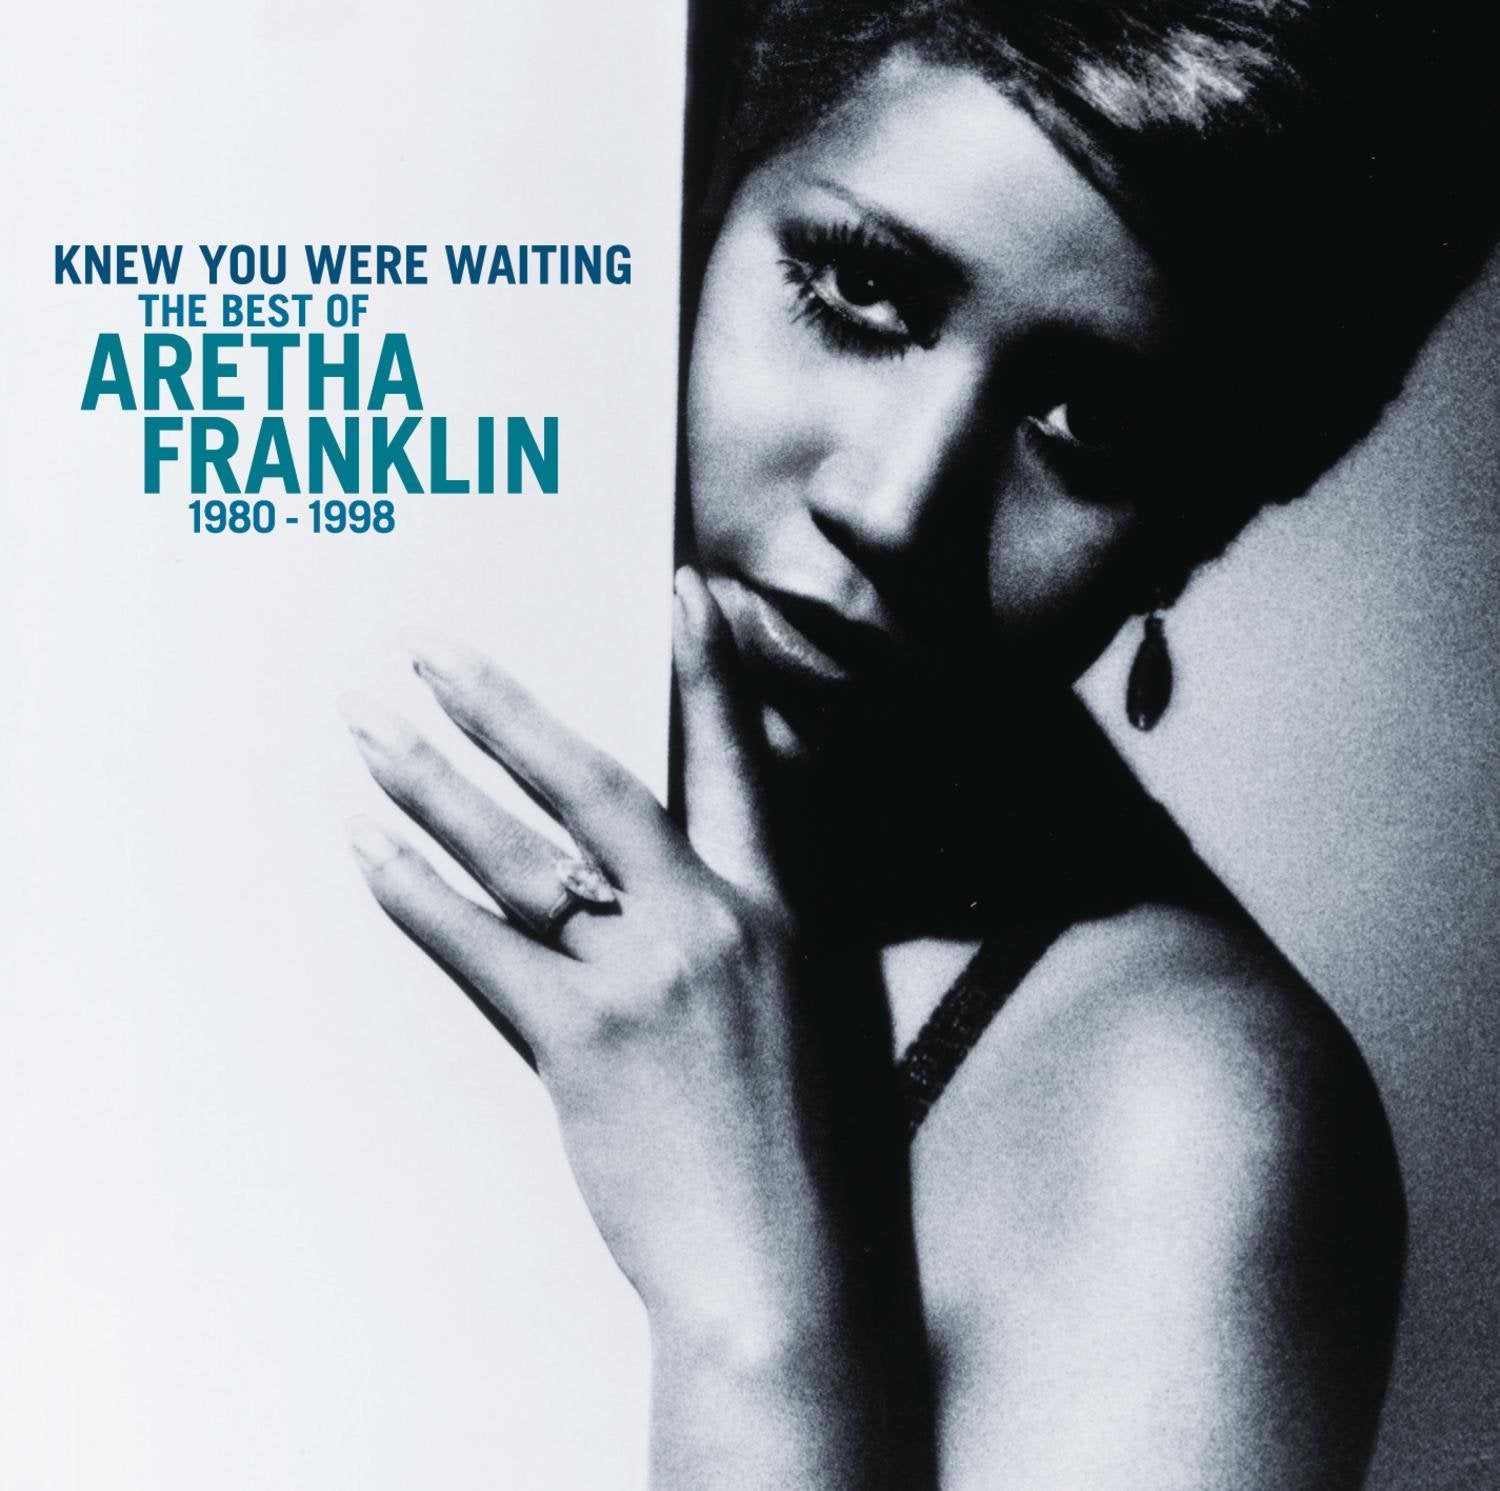 ARETHA FRANKLIN - Knew You Were Waiting: The Best Of 1980-2014 - 2LP - Vinyl